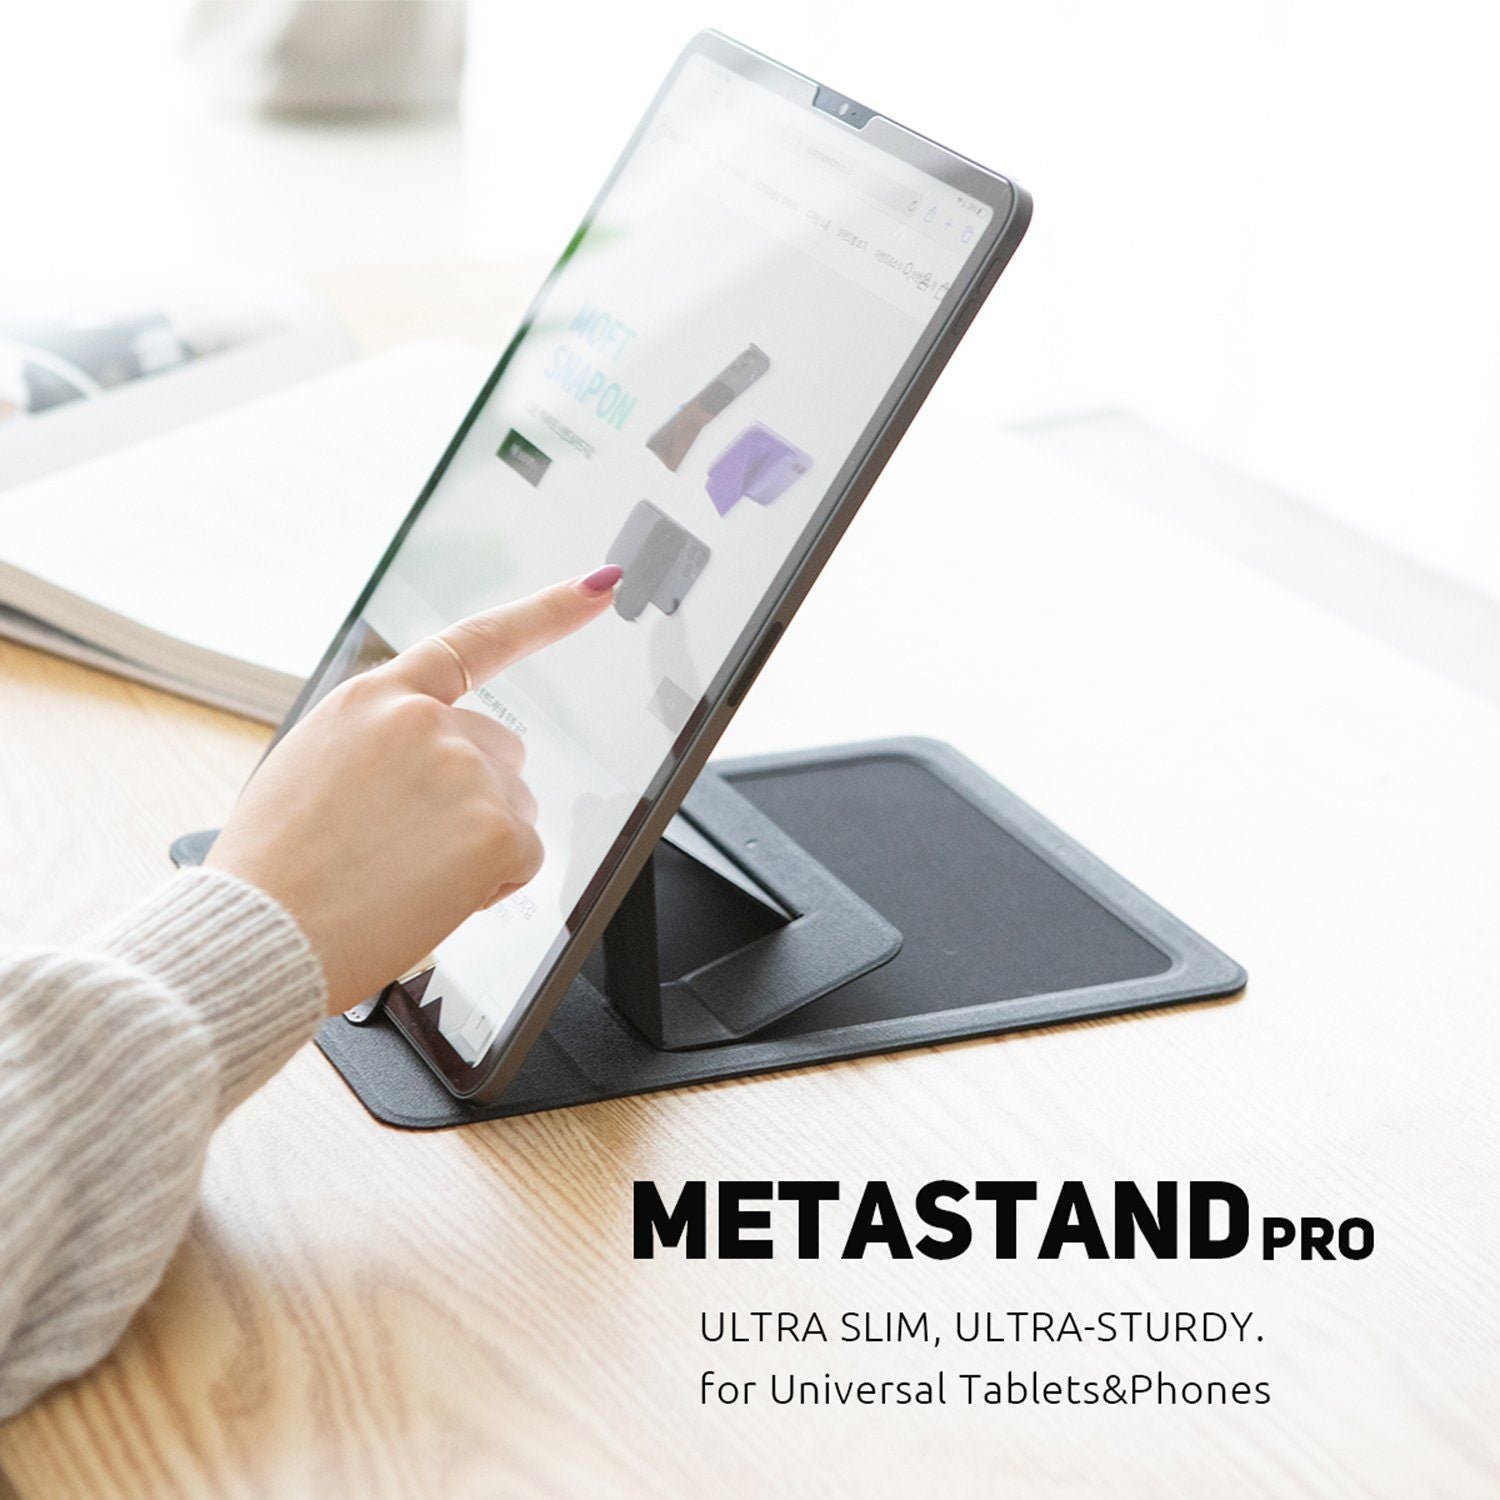 Ergomi Meta Pro Portable & Foldable Laptop Stand Paper-Thin Higher Angle for Laptop Tablet Mouse Pad Default Ergomi 